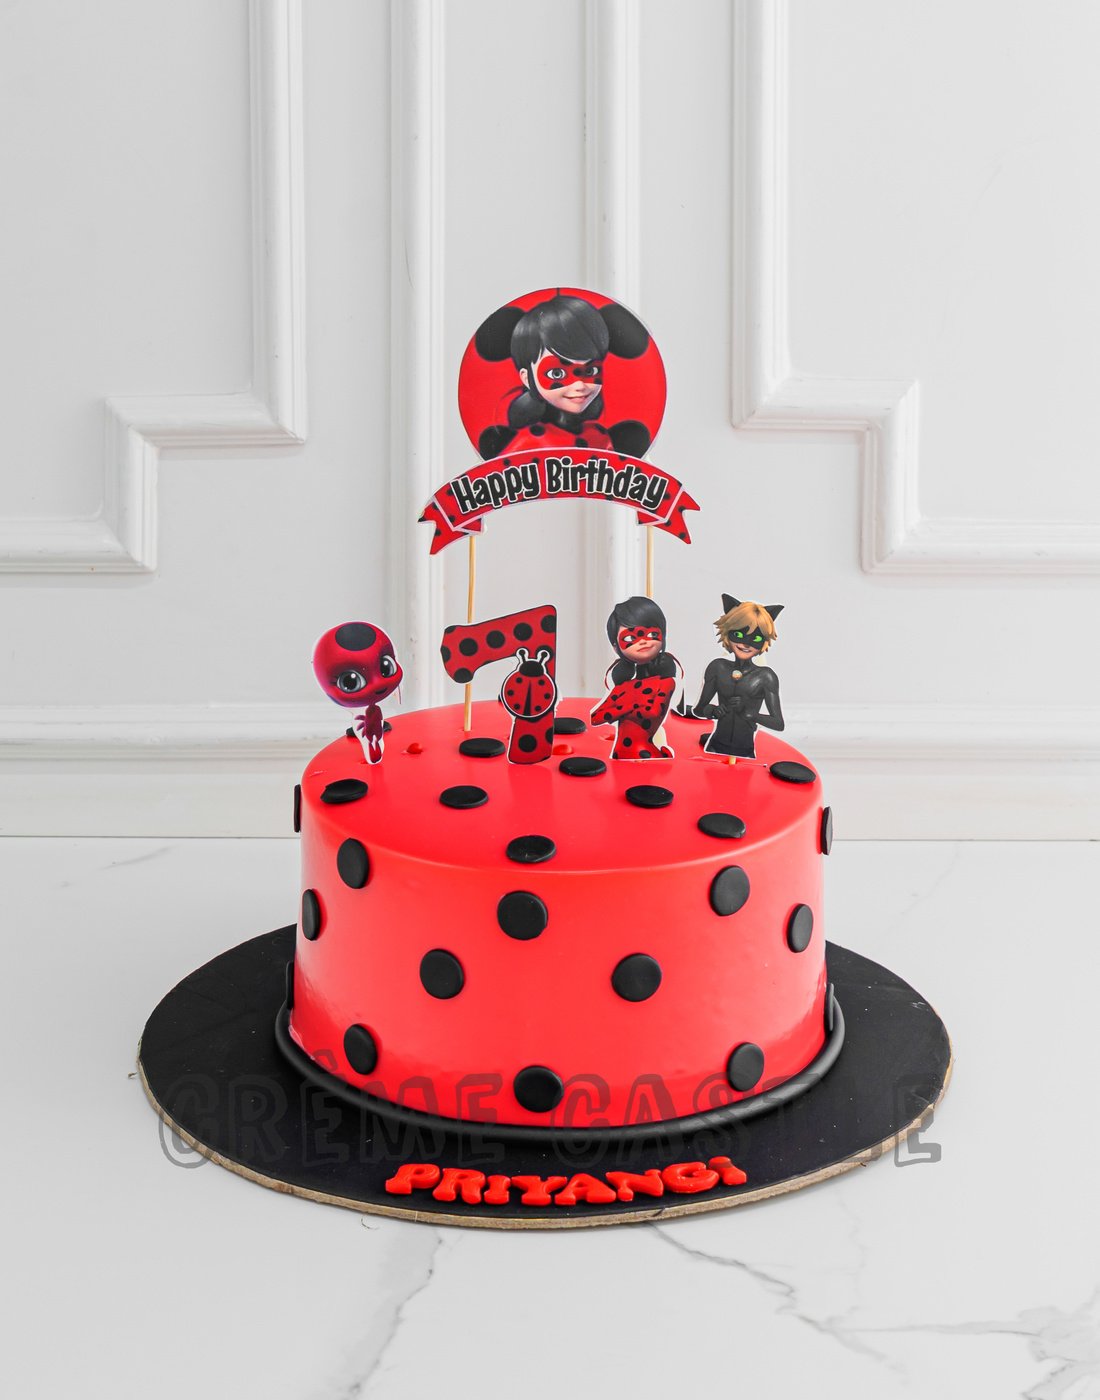 I Made] Miraculous Lady bug birthday cake and cupcakes. : r/Baking